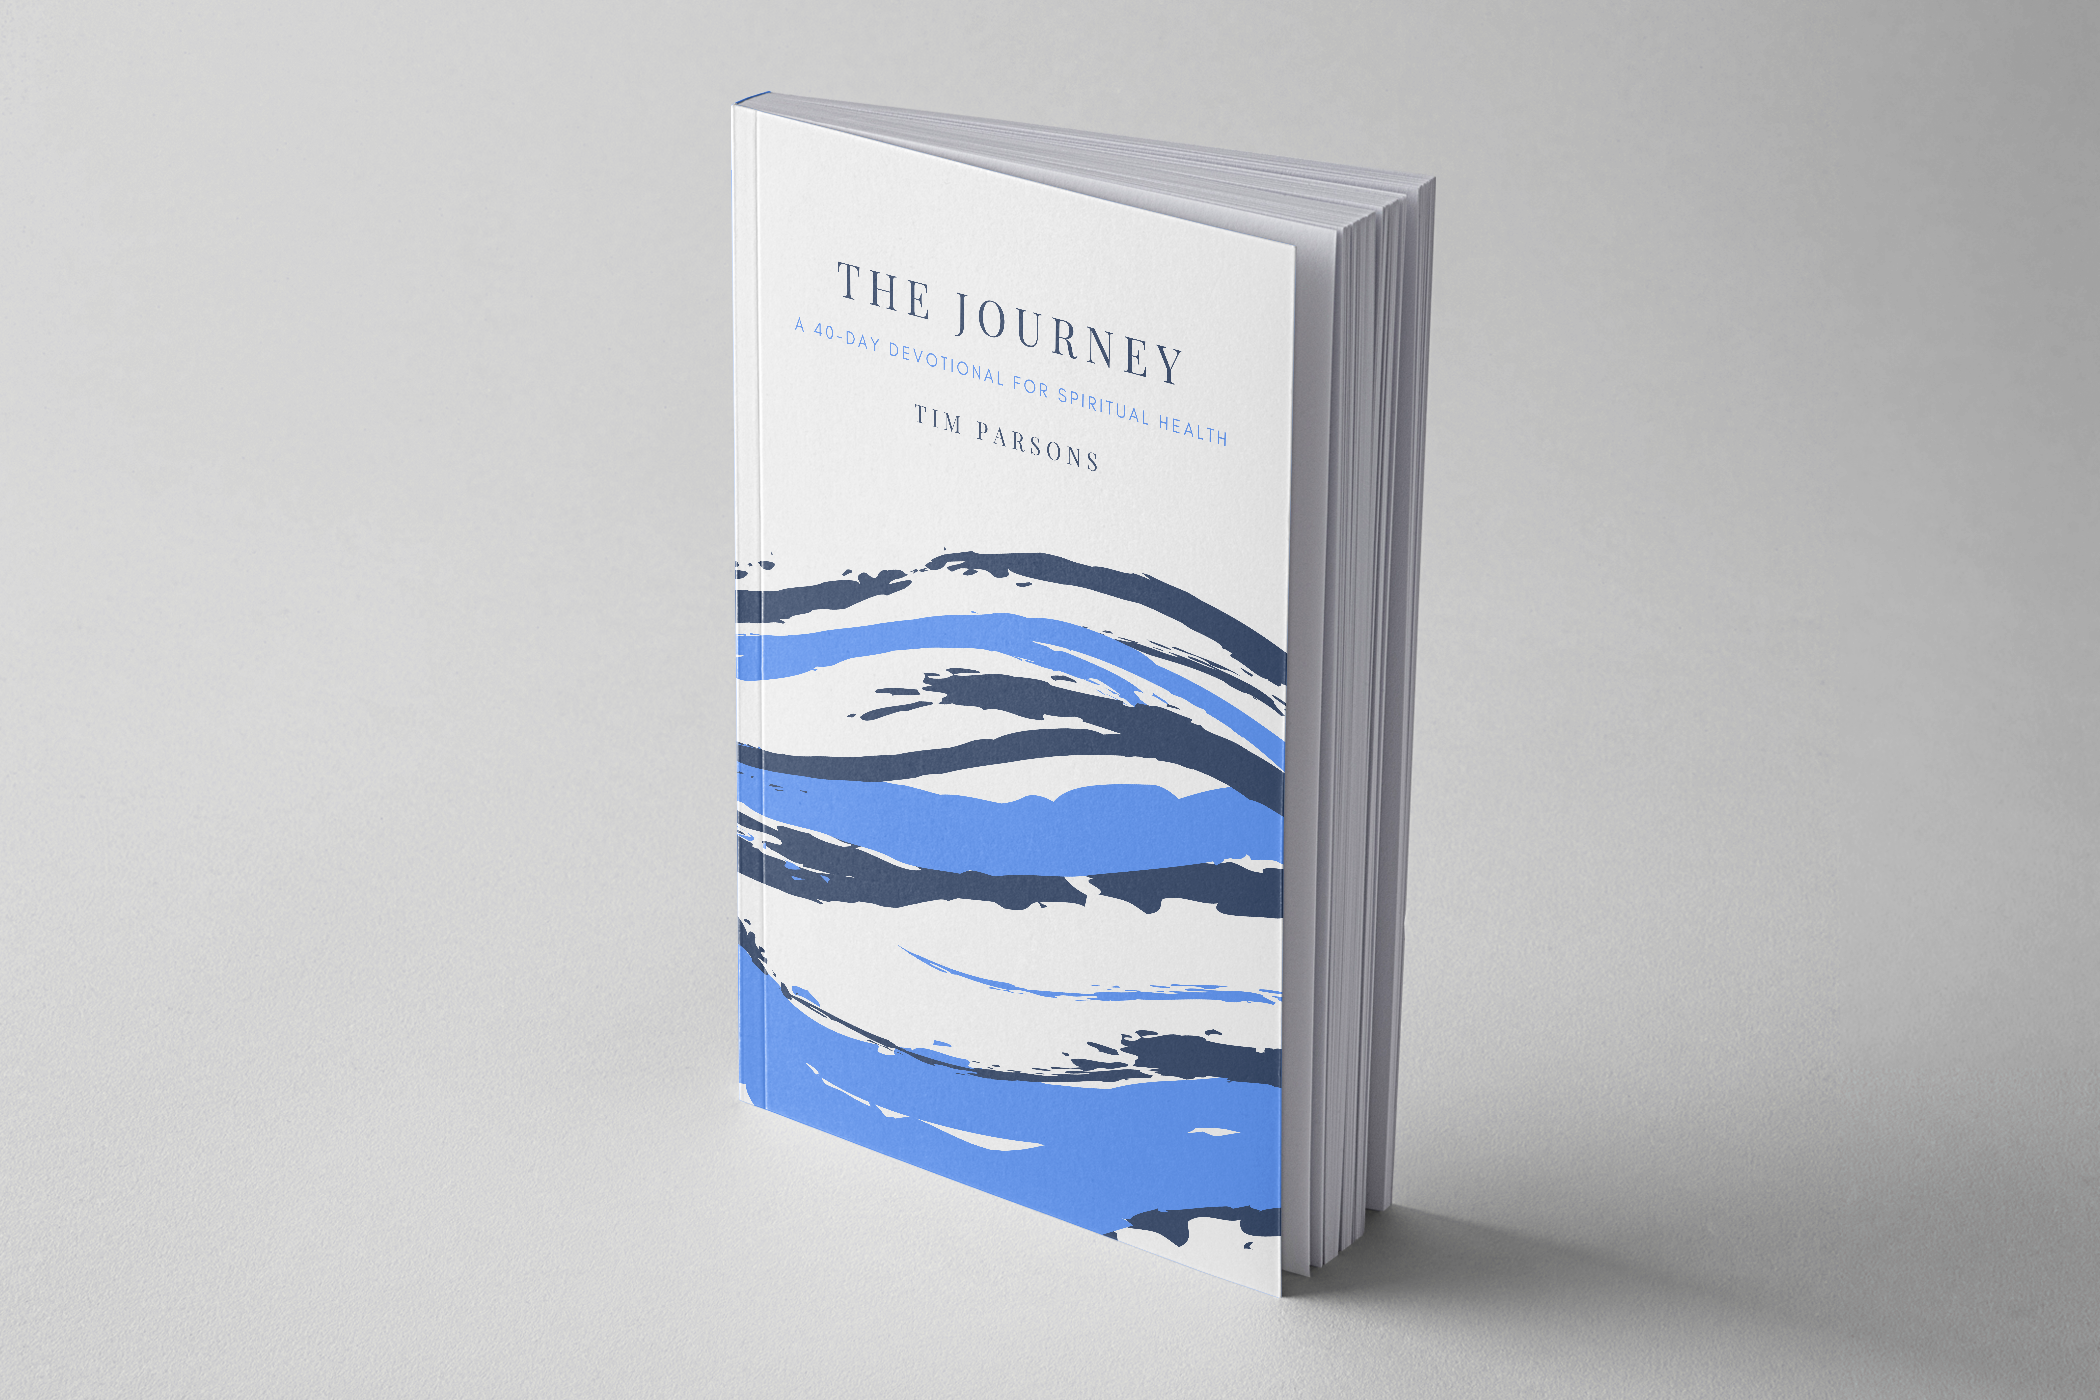 The Journey: A 40-Day Devotional for Spiritual Health